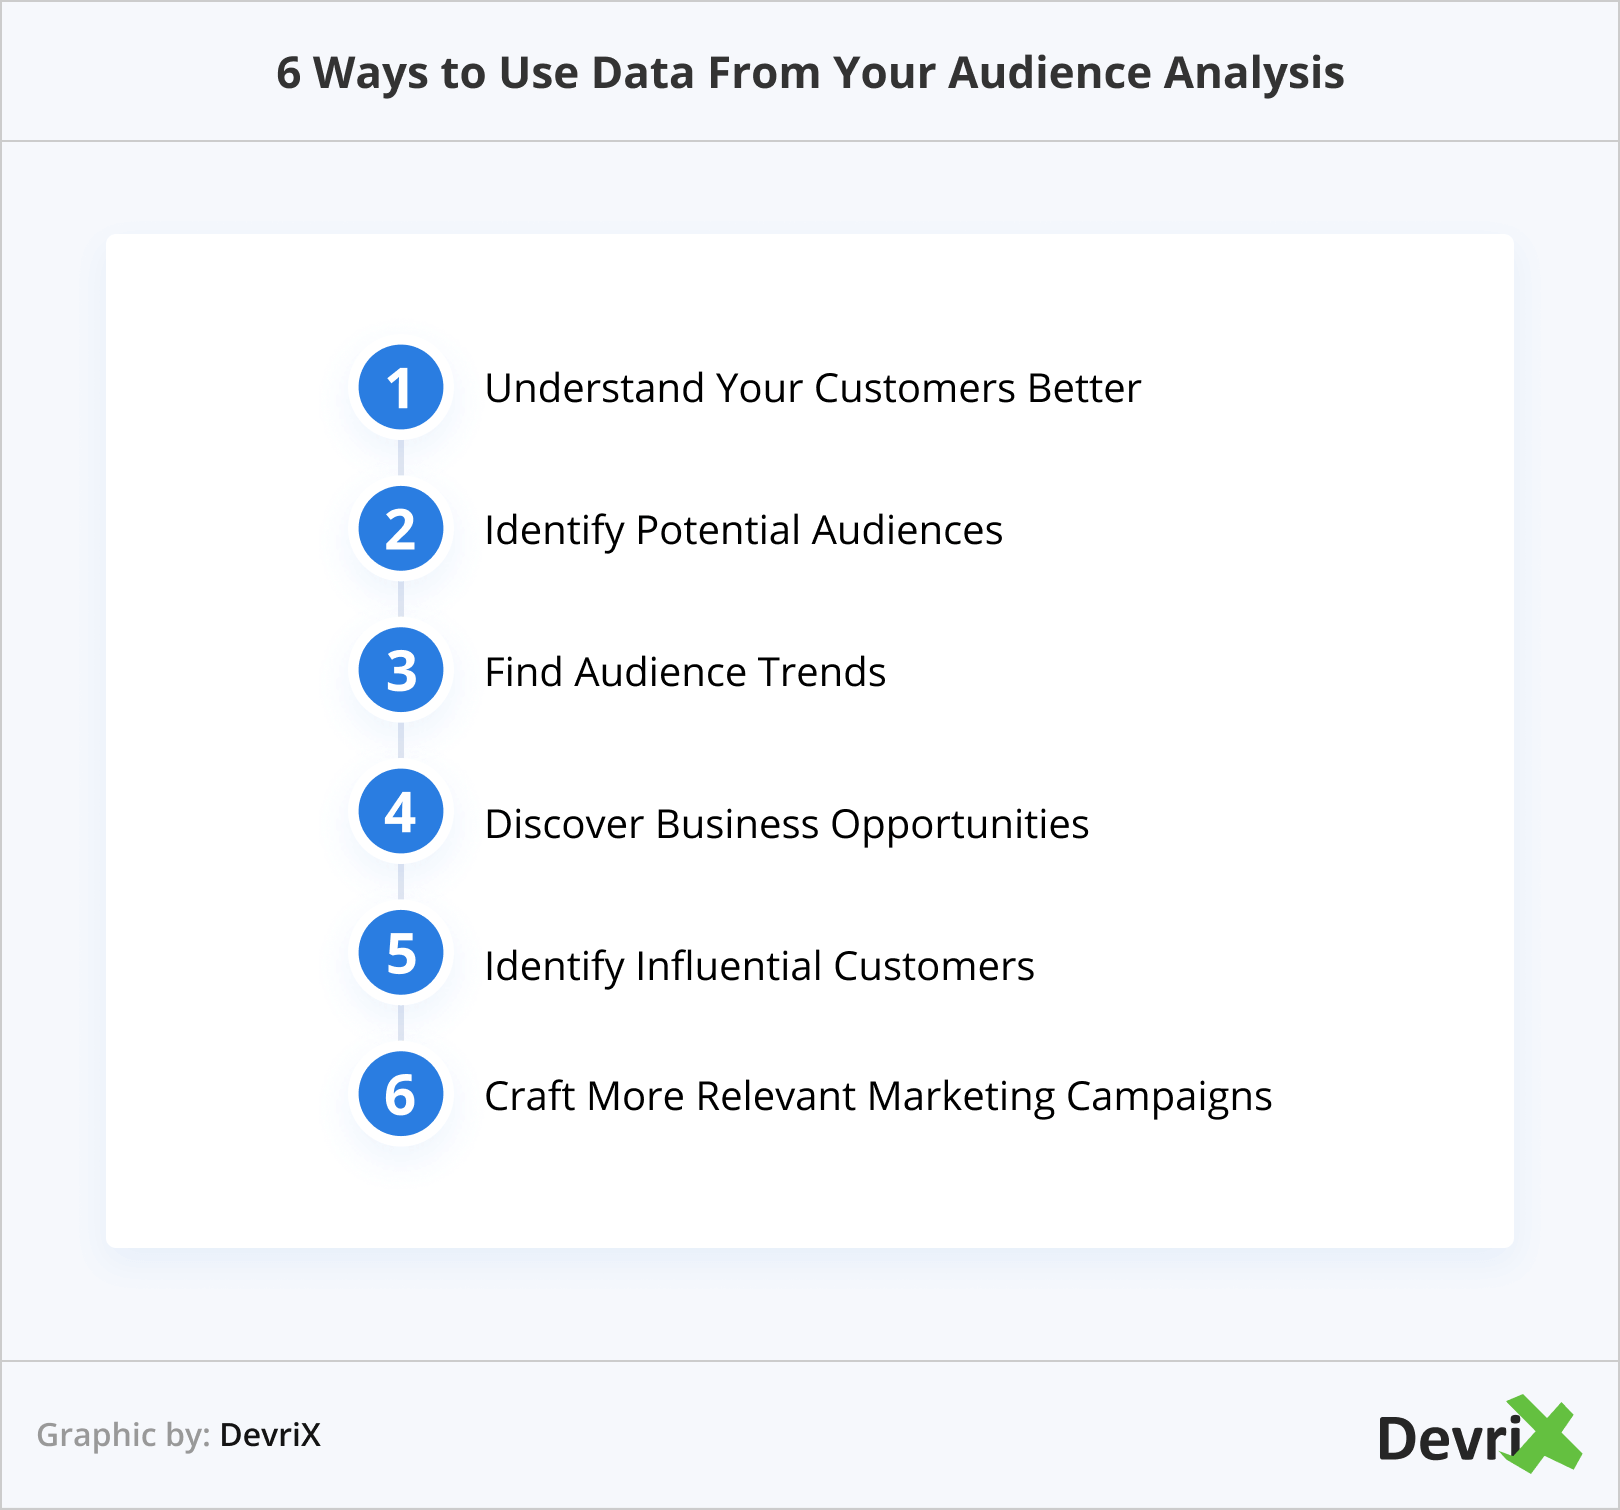 6 Ways to Use Data From Your Audience Analysis